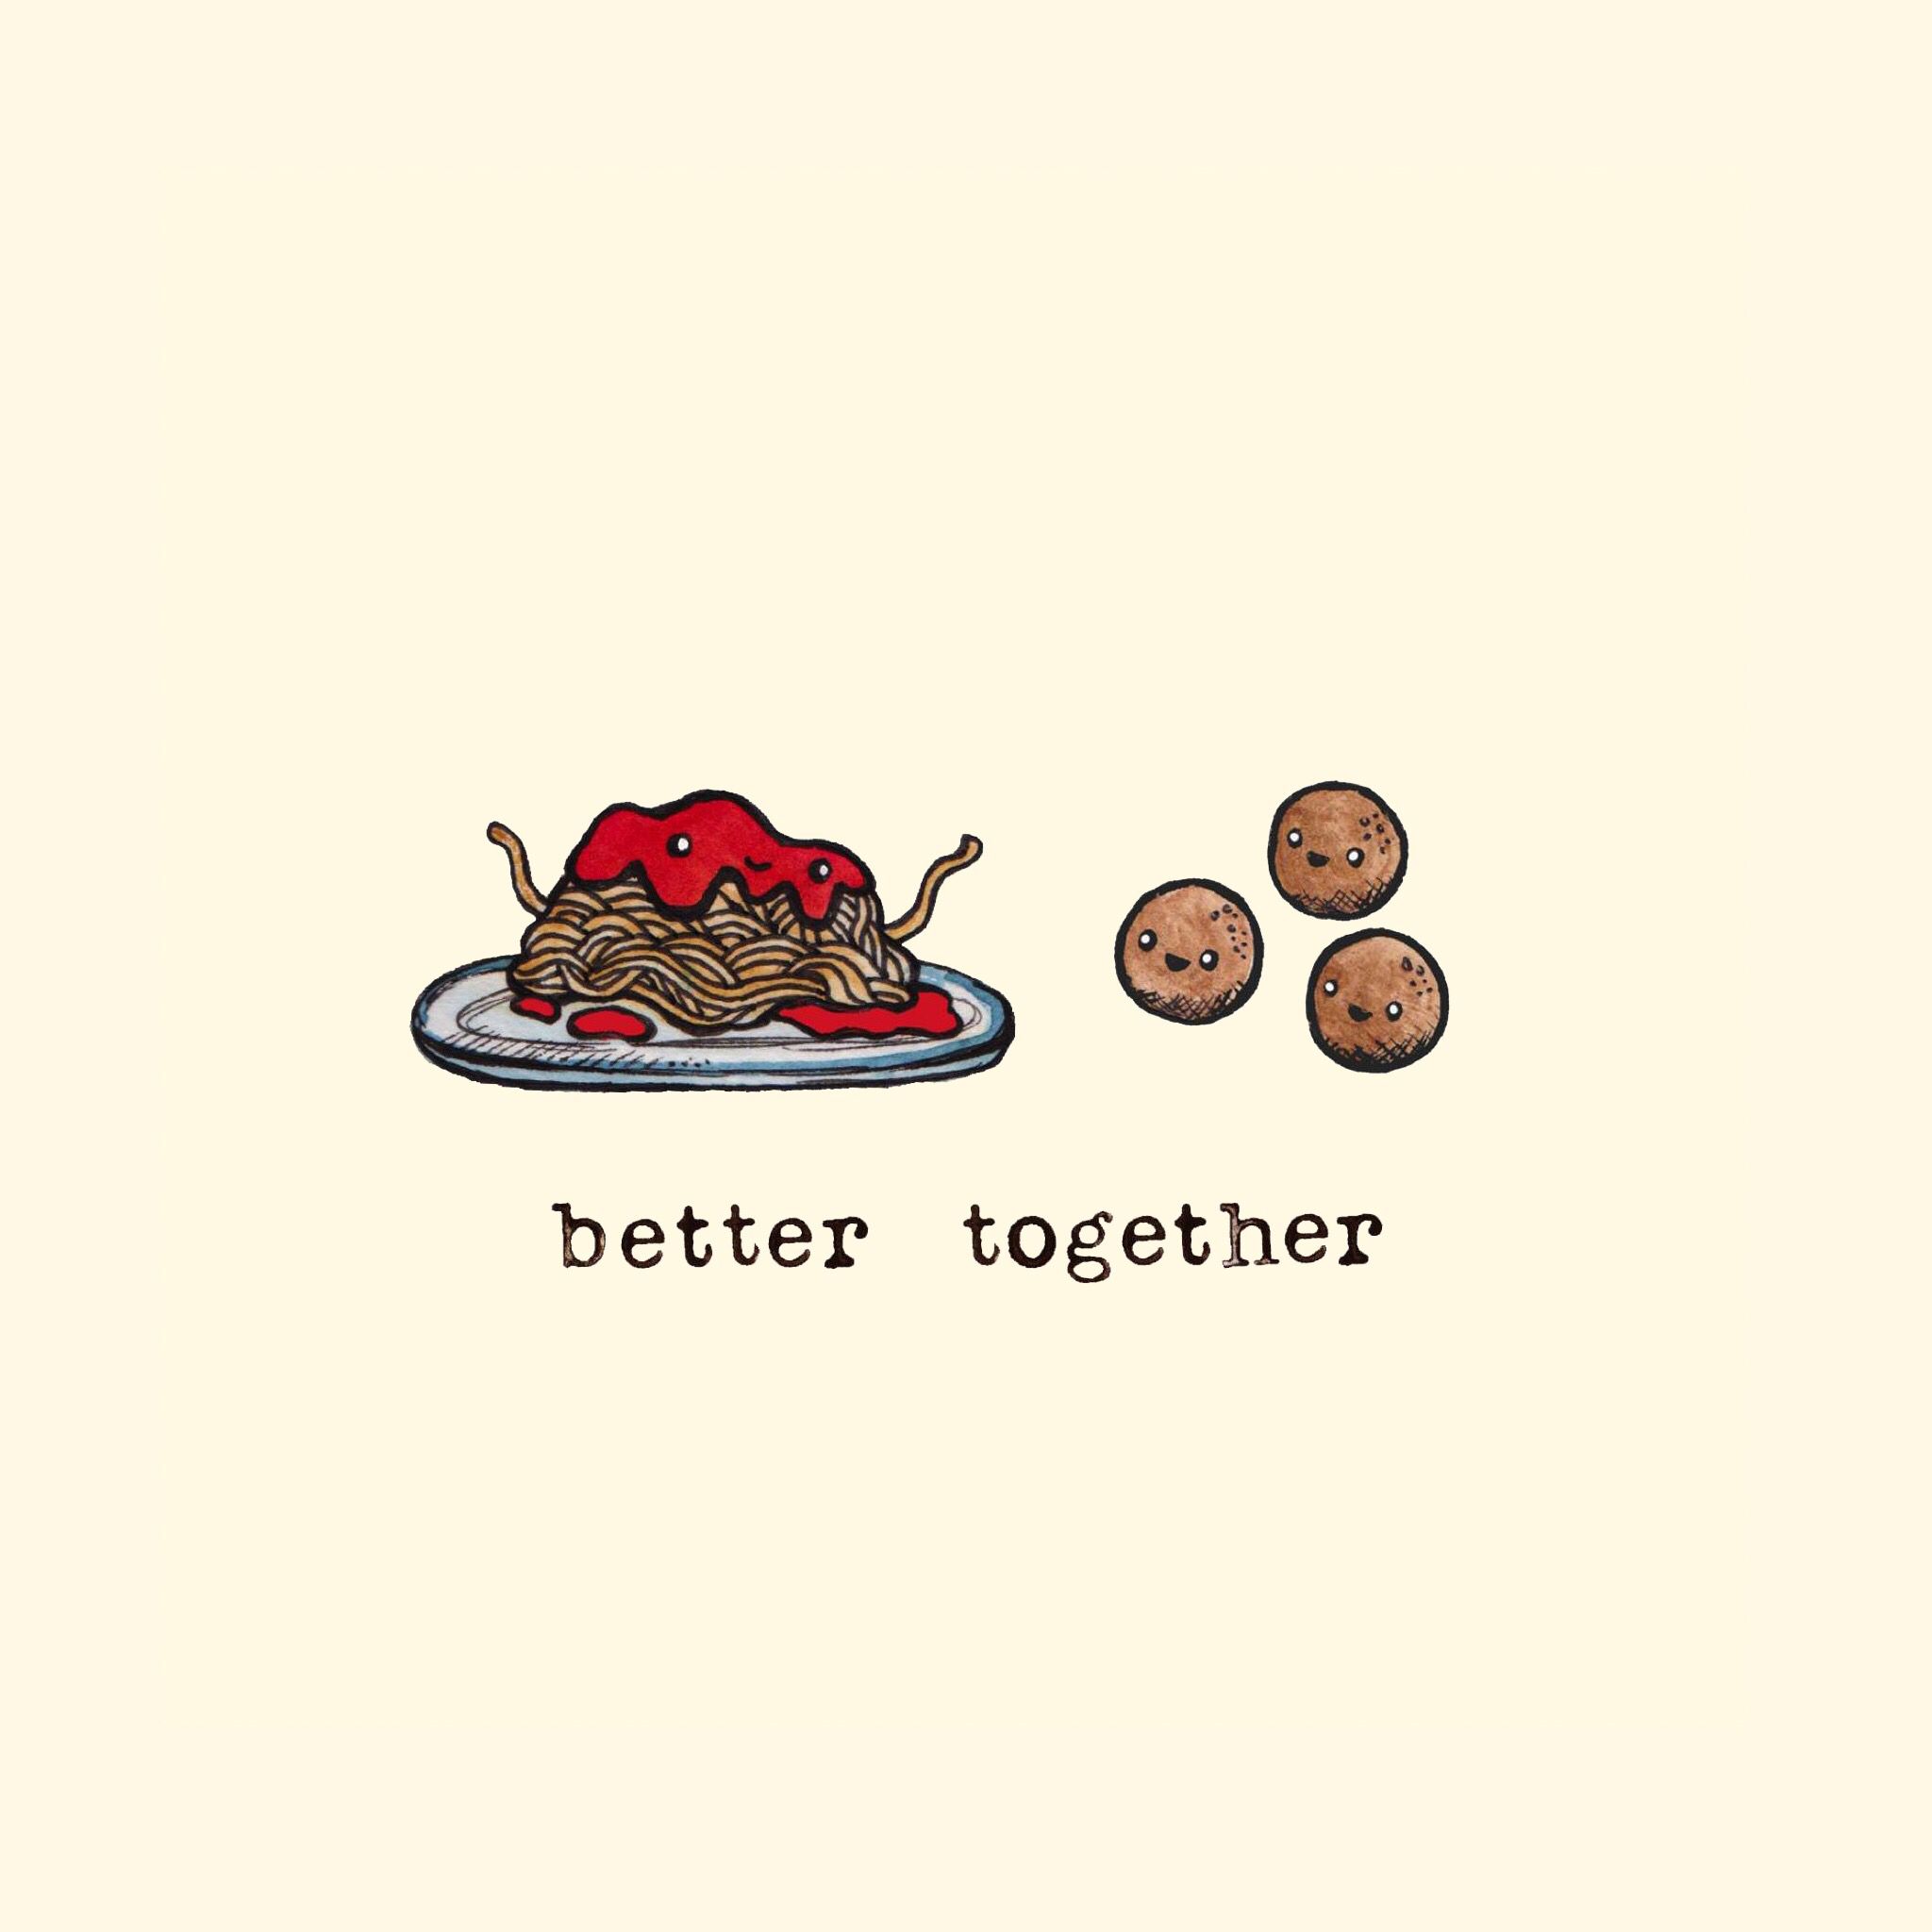 Better together. Better together, Funny wallpaper, Kawaii drawings